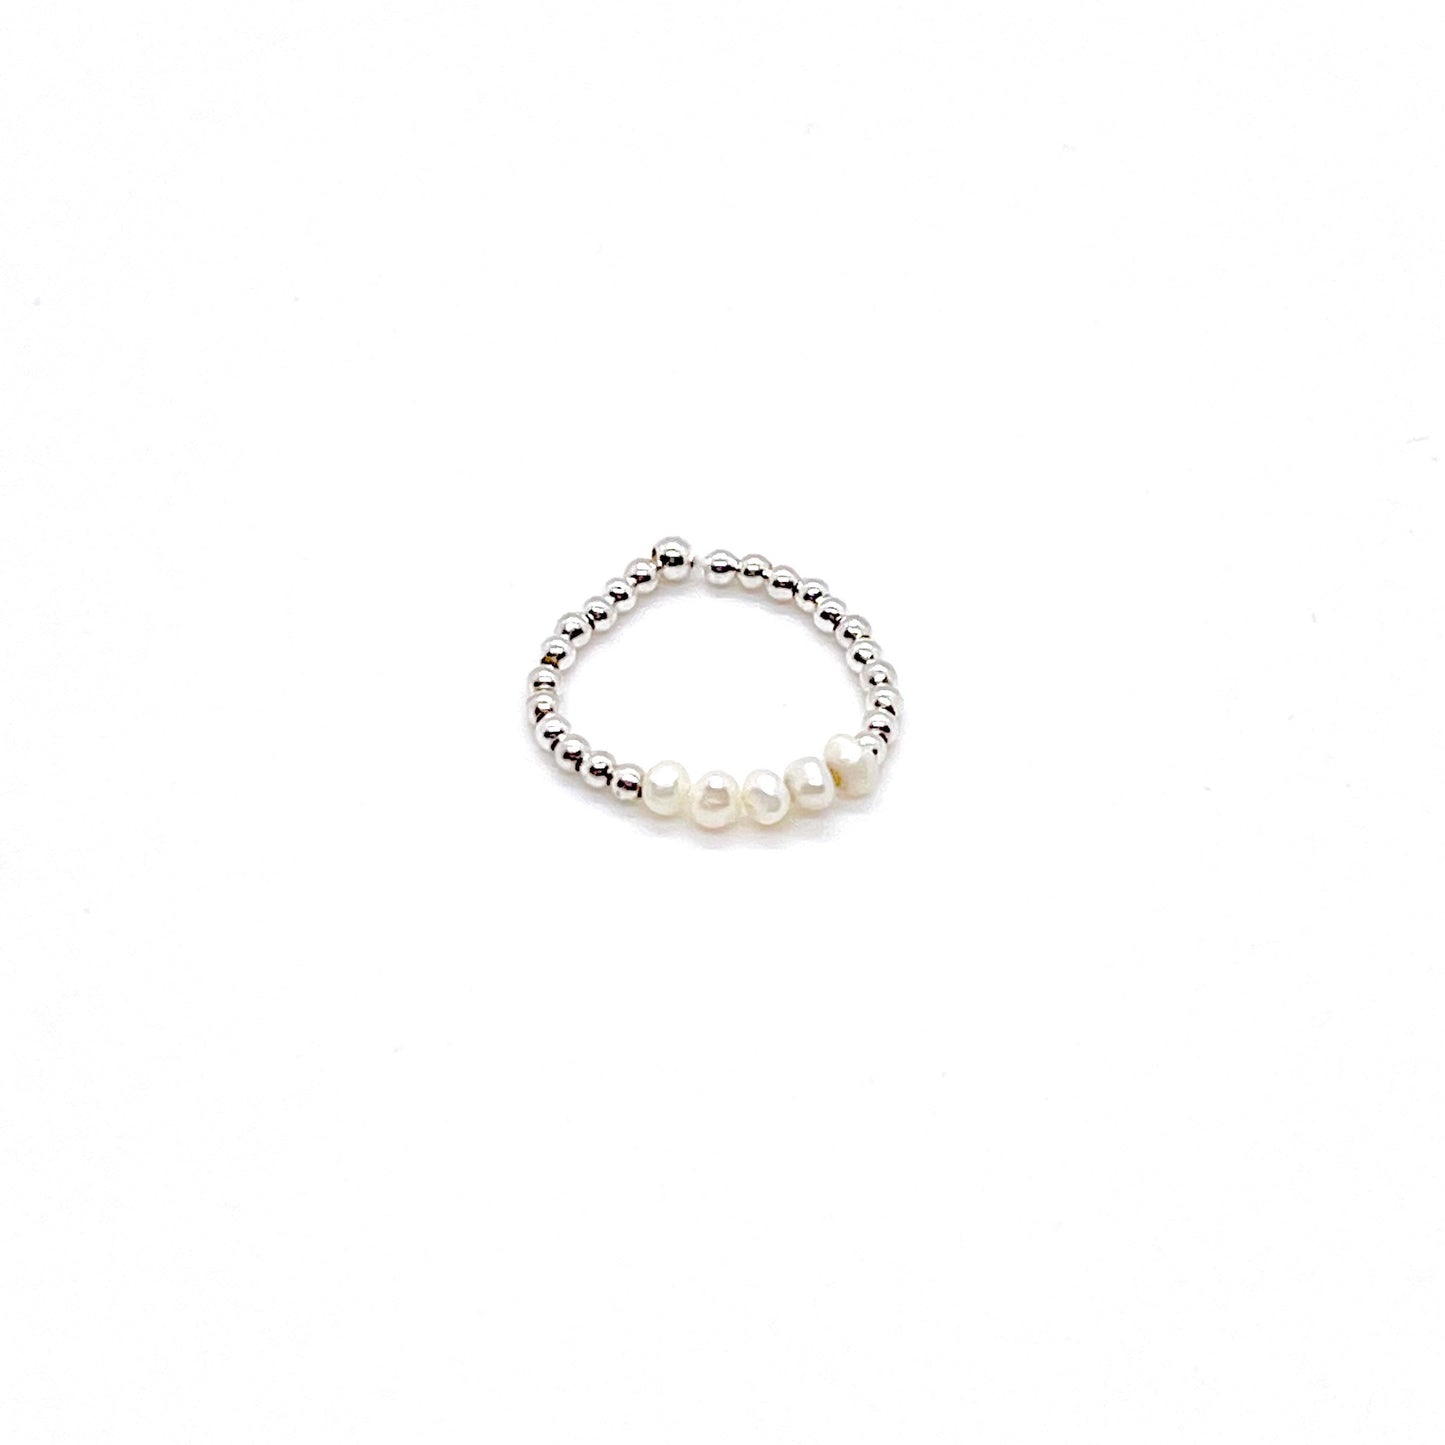 Freshwater pearls stretch ring with 2mm sterling silver beads and a row of freshwater button pearls in the center.